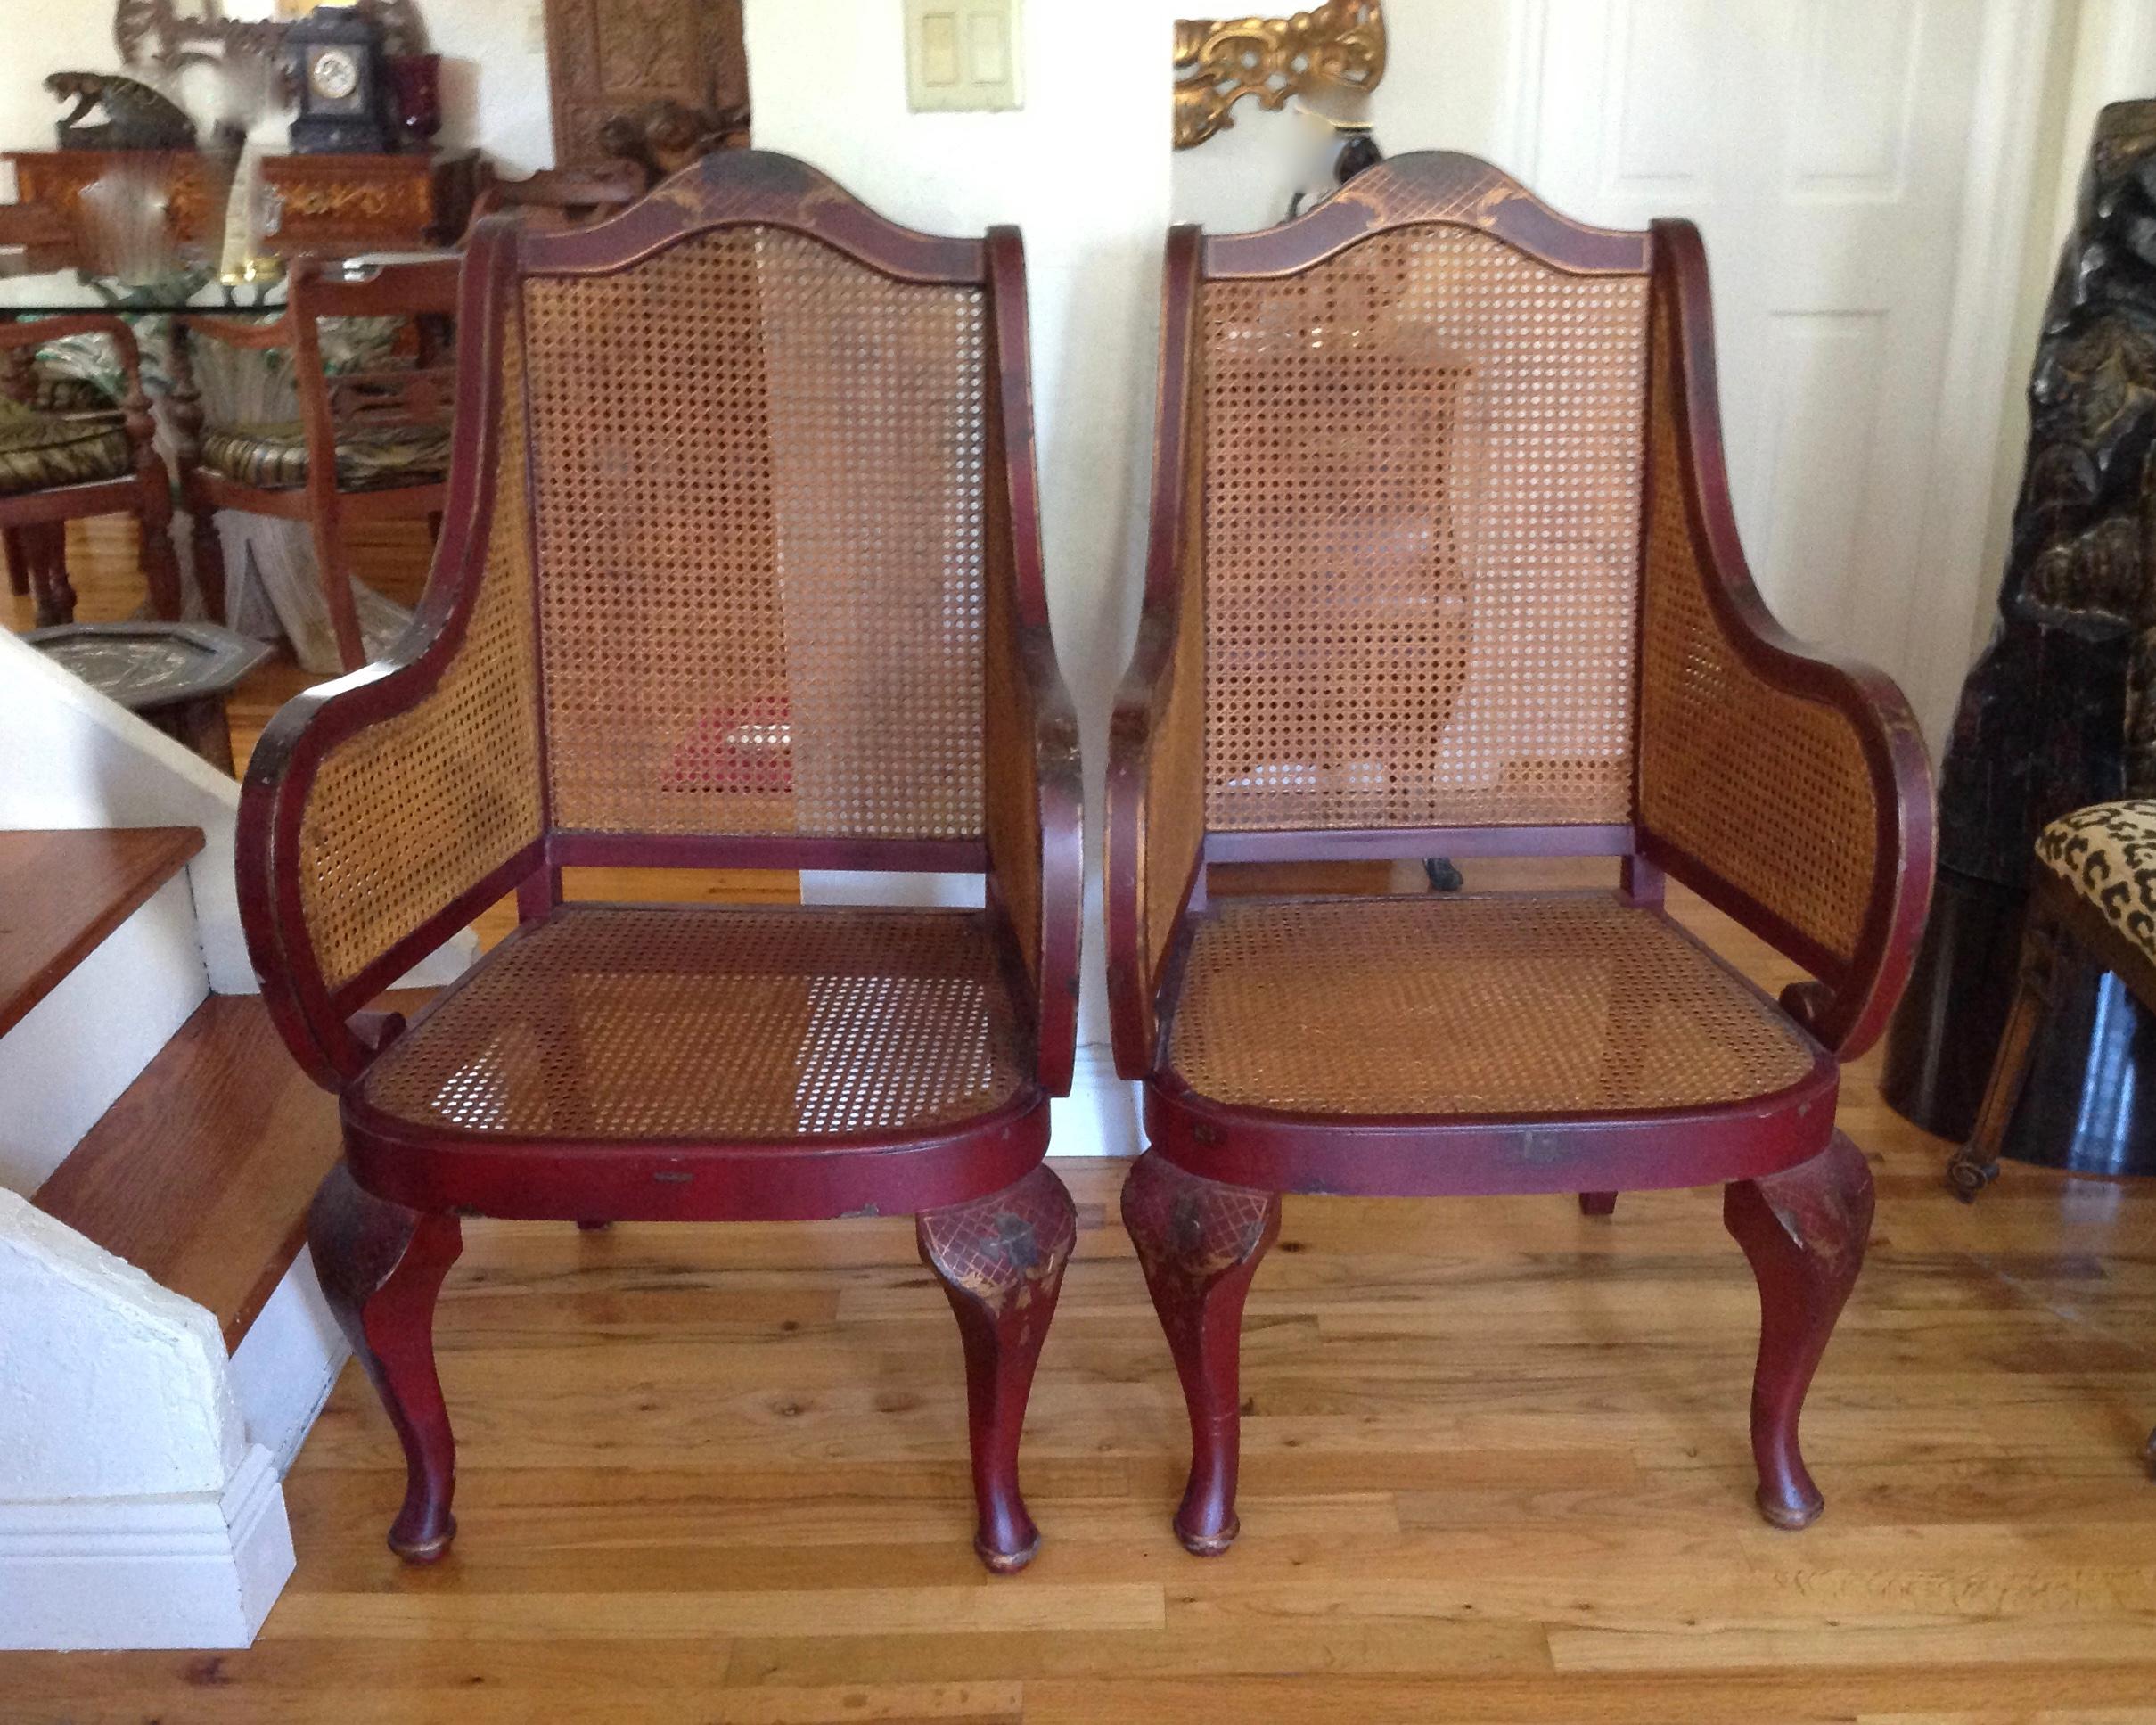 A superb pair of William IV chairs with double caned sides.
Graceful style with fine muted pen work against the red background.